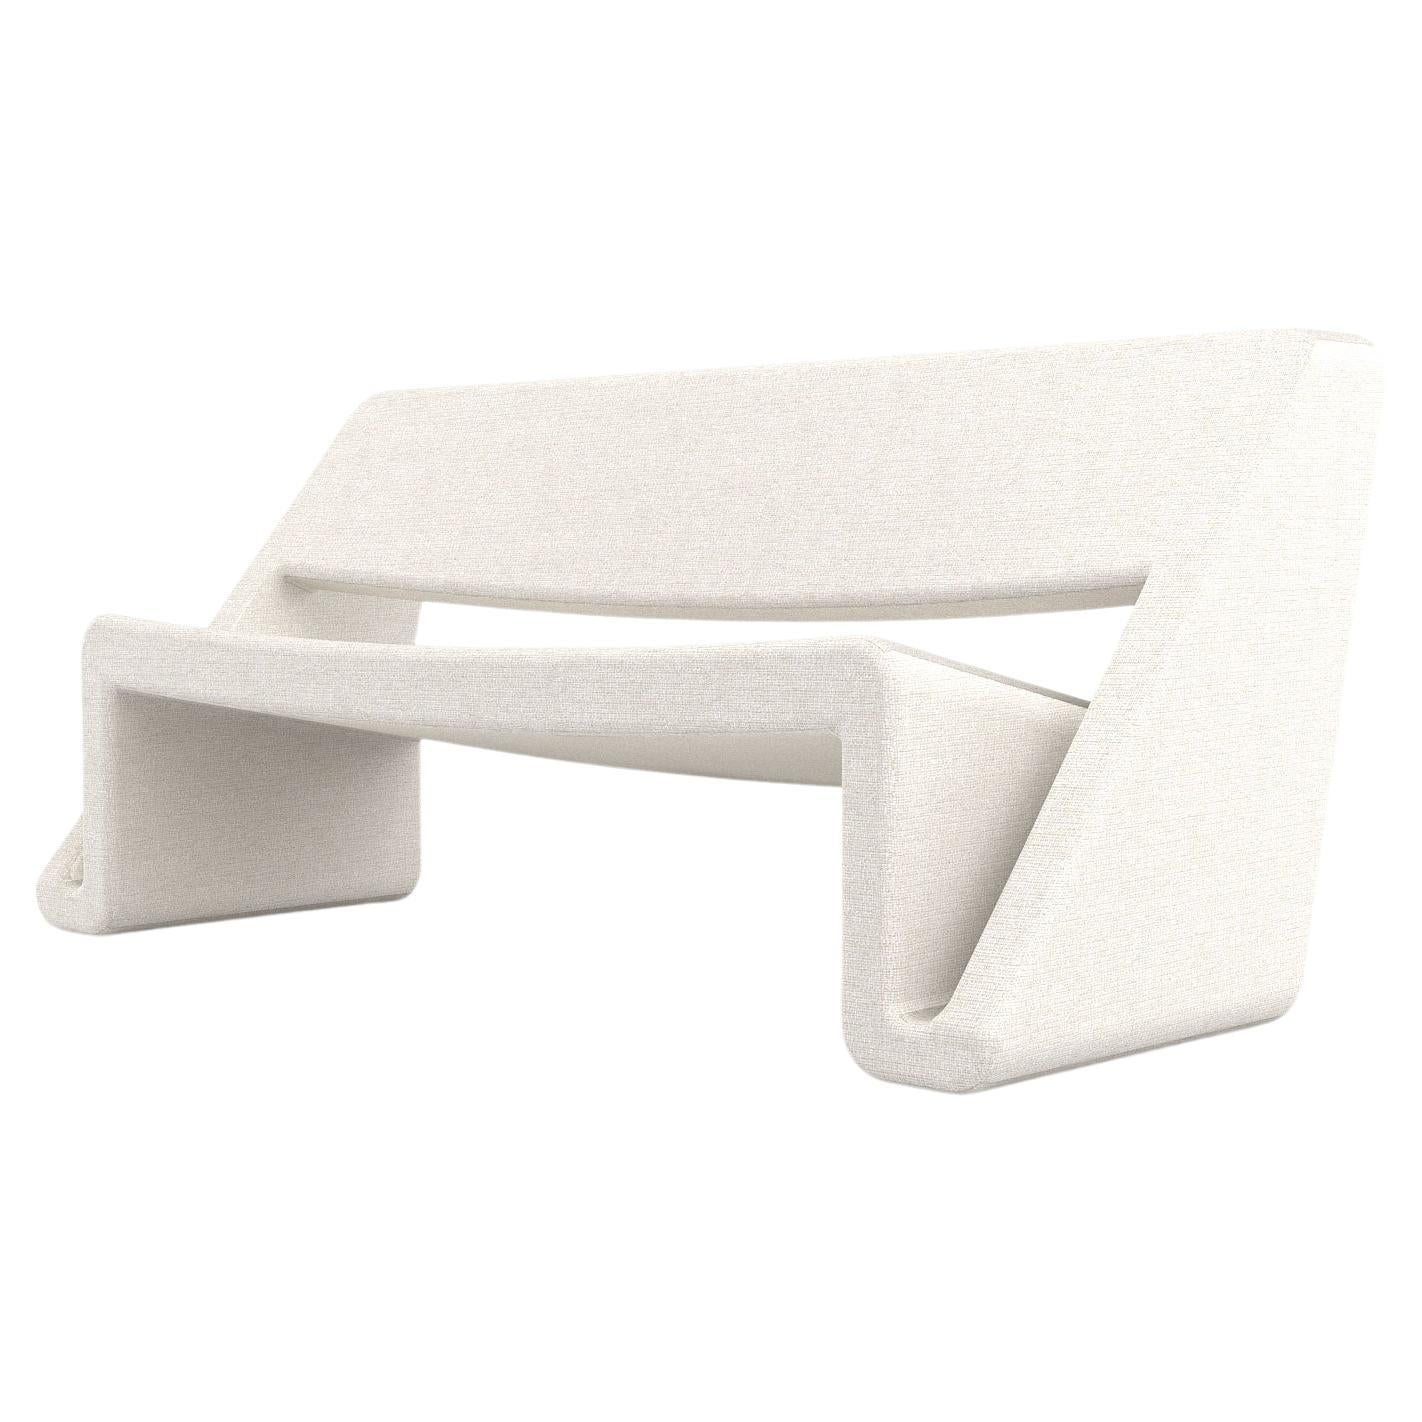 Jet Sofa - Modern White Upholstered Two Seat Sofa For Sale